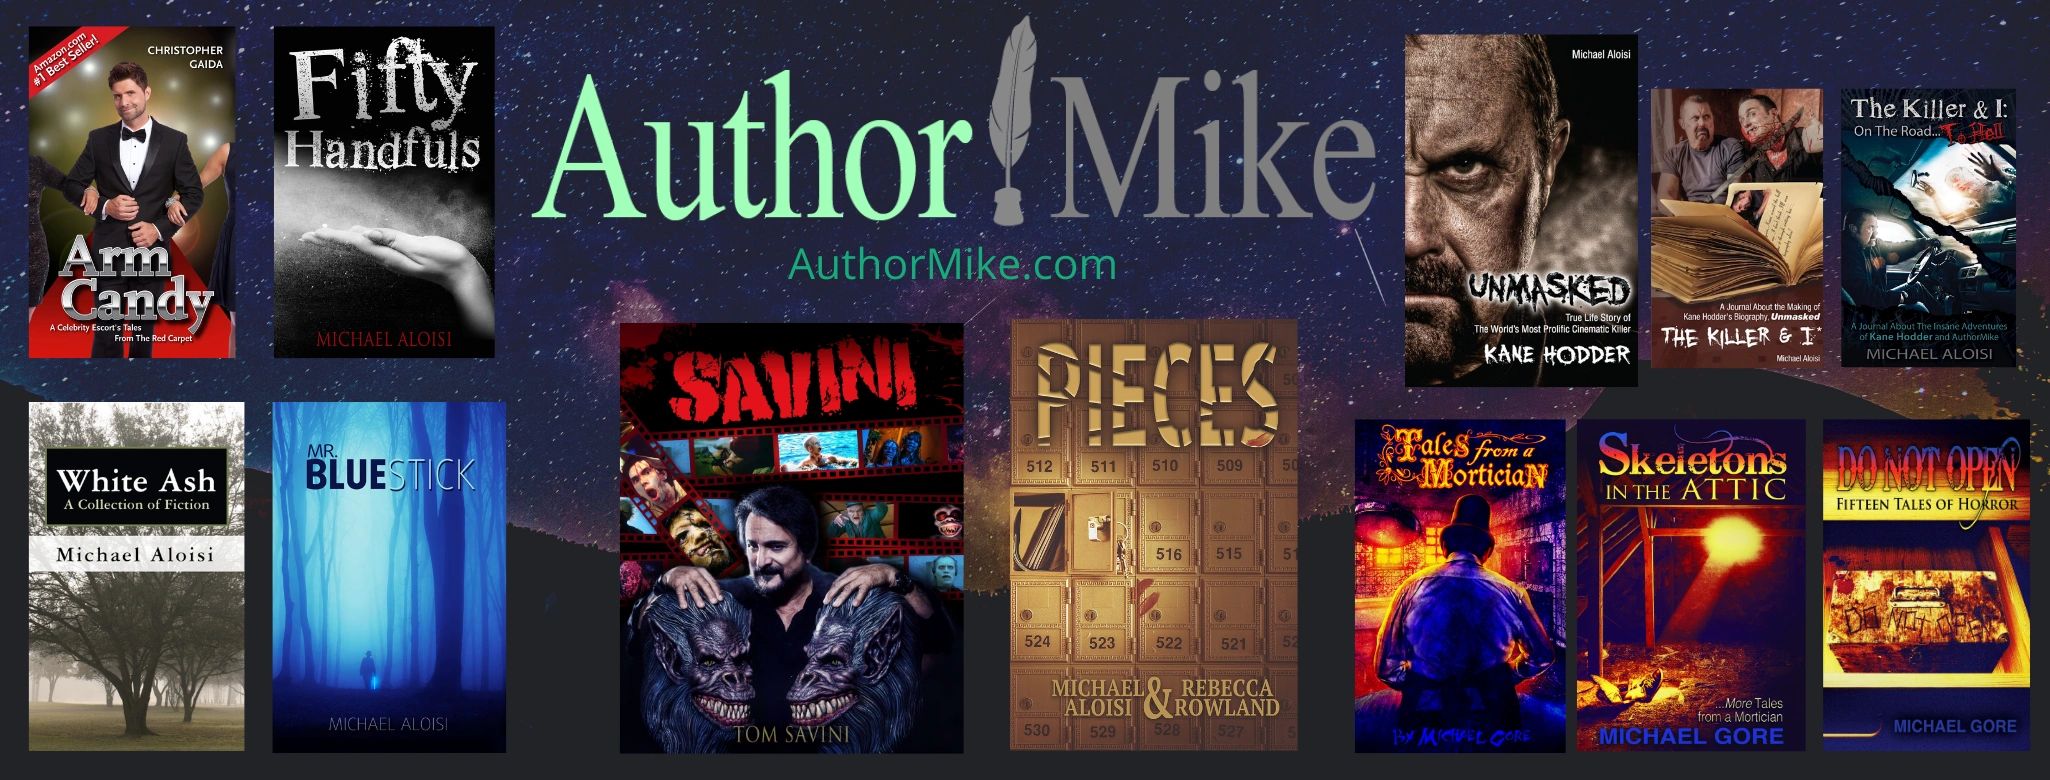 AuthorMike's Books!